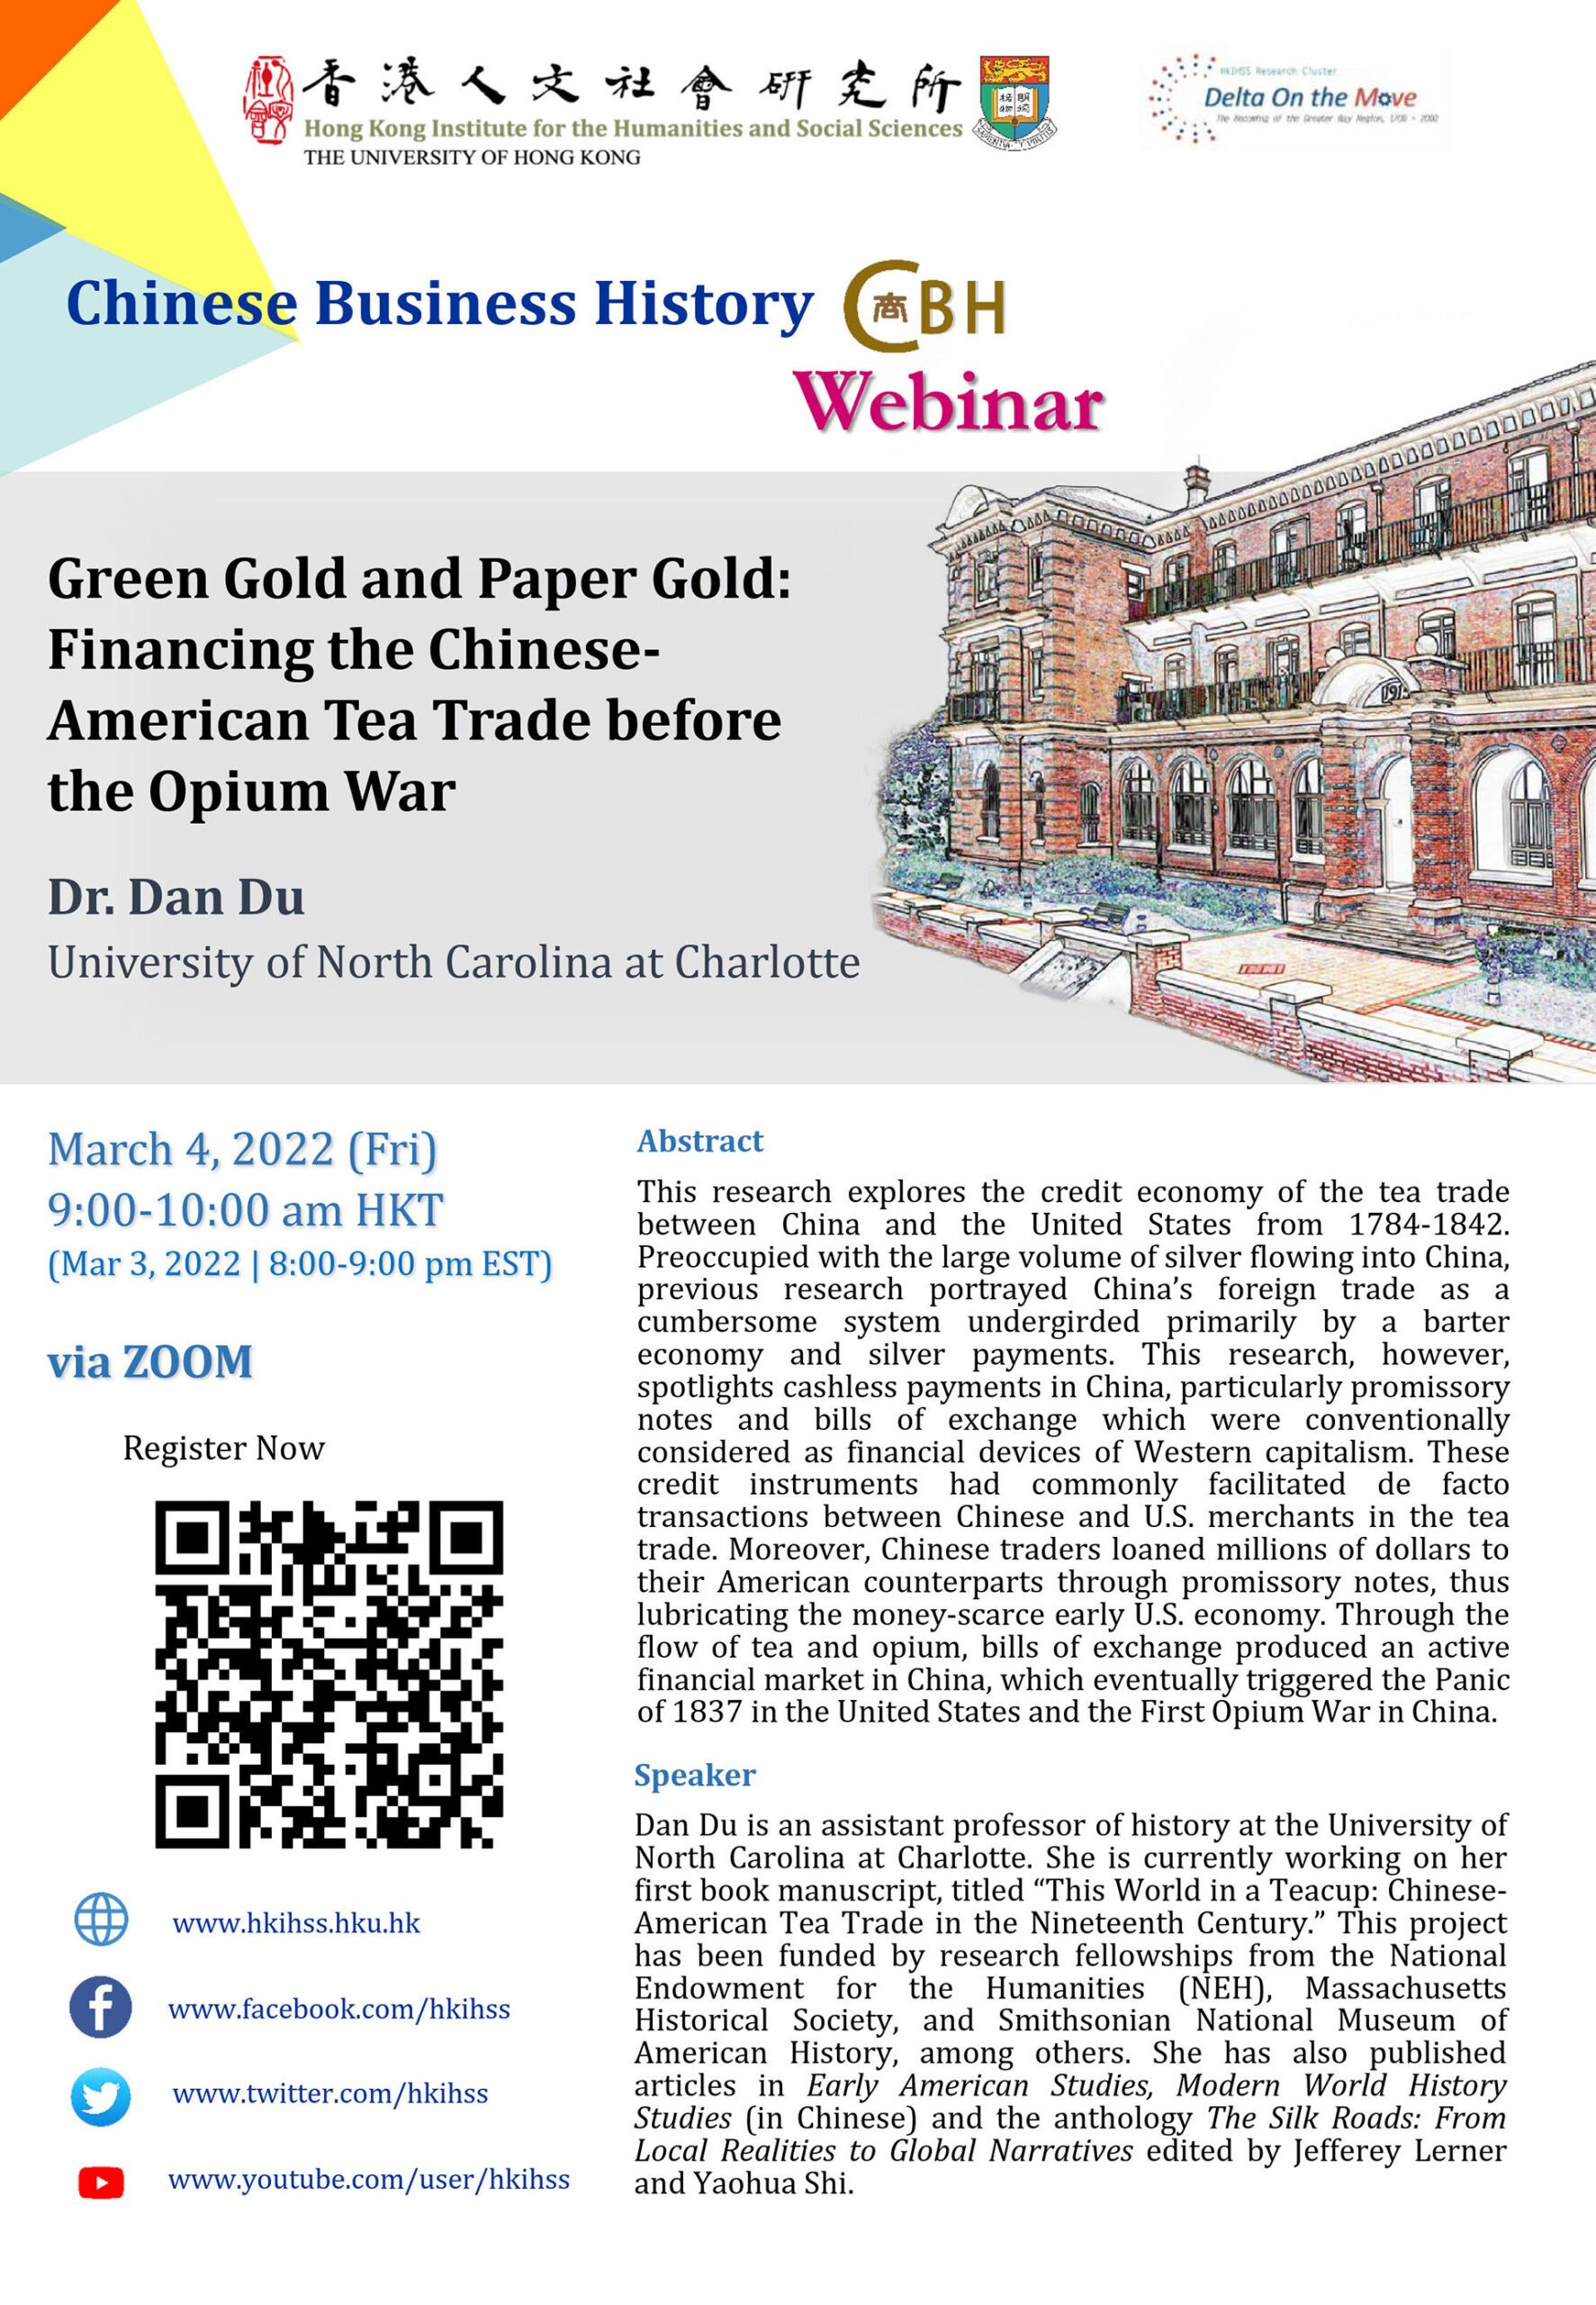 Chinese Business History Webinar on “Green Gold and Paper Gold: Financing the Chinese-American Tea Trade before the Opium War” by Dr. Dan Du on March 4, 2022